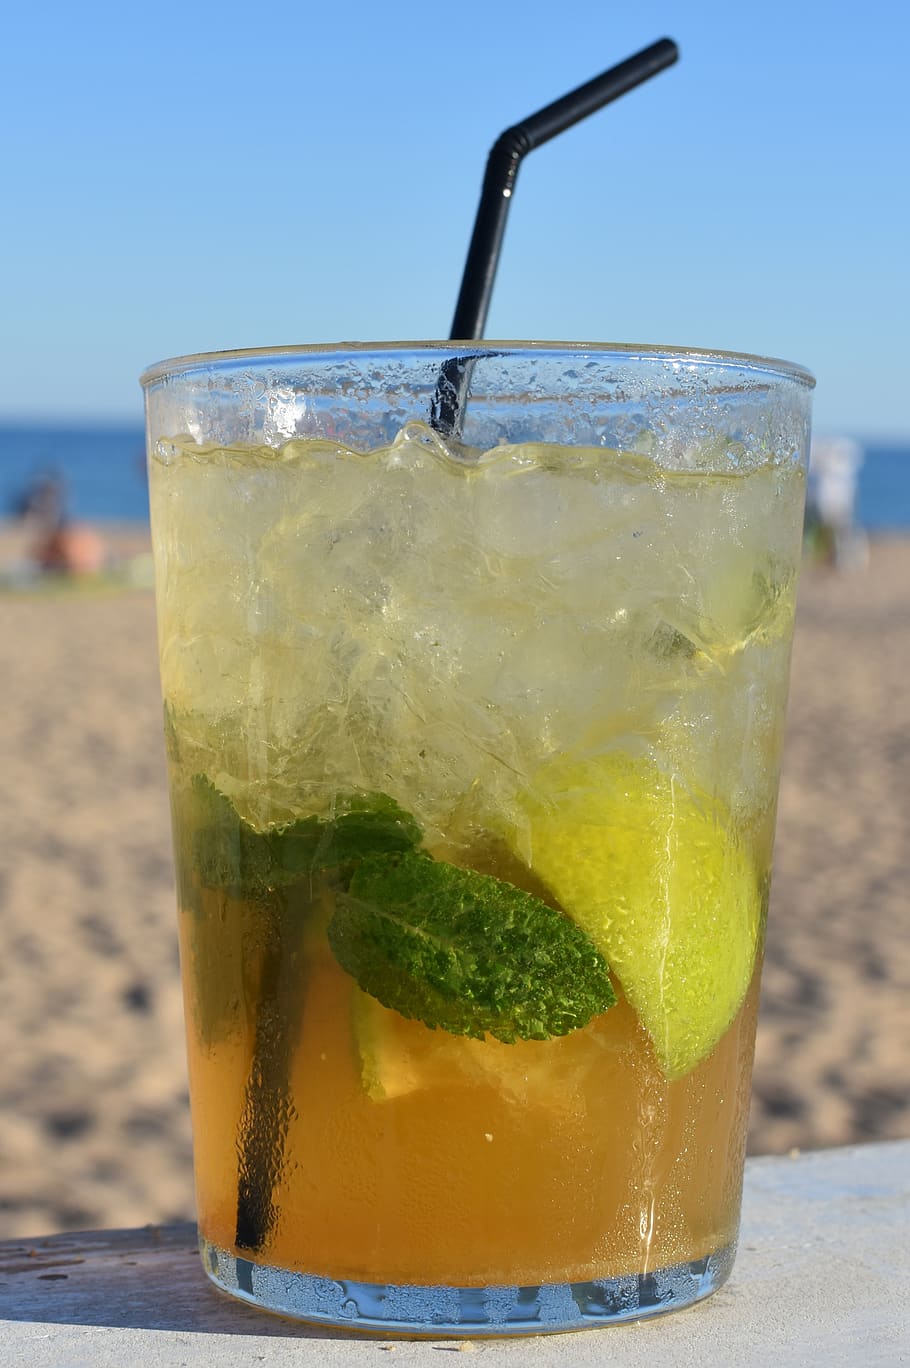 mojito, beach, drink, alcohol, drinking, straw, relaxation, cocktail, lime, currency